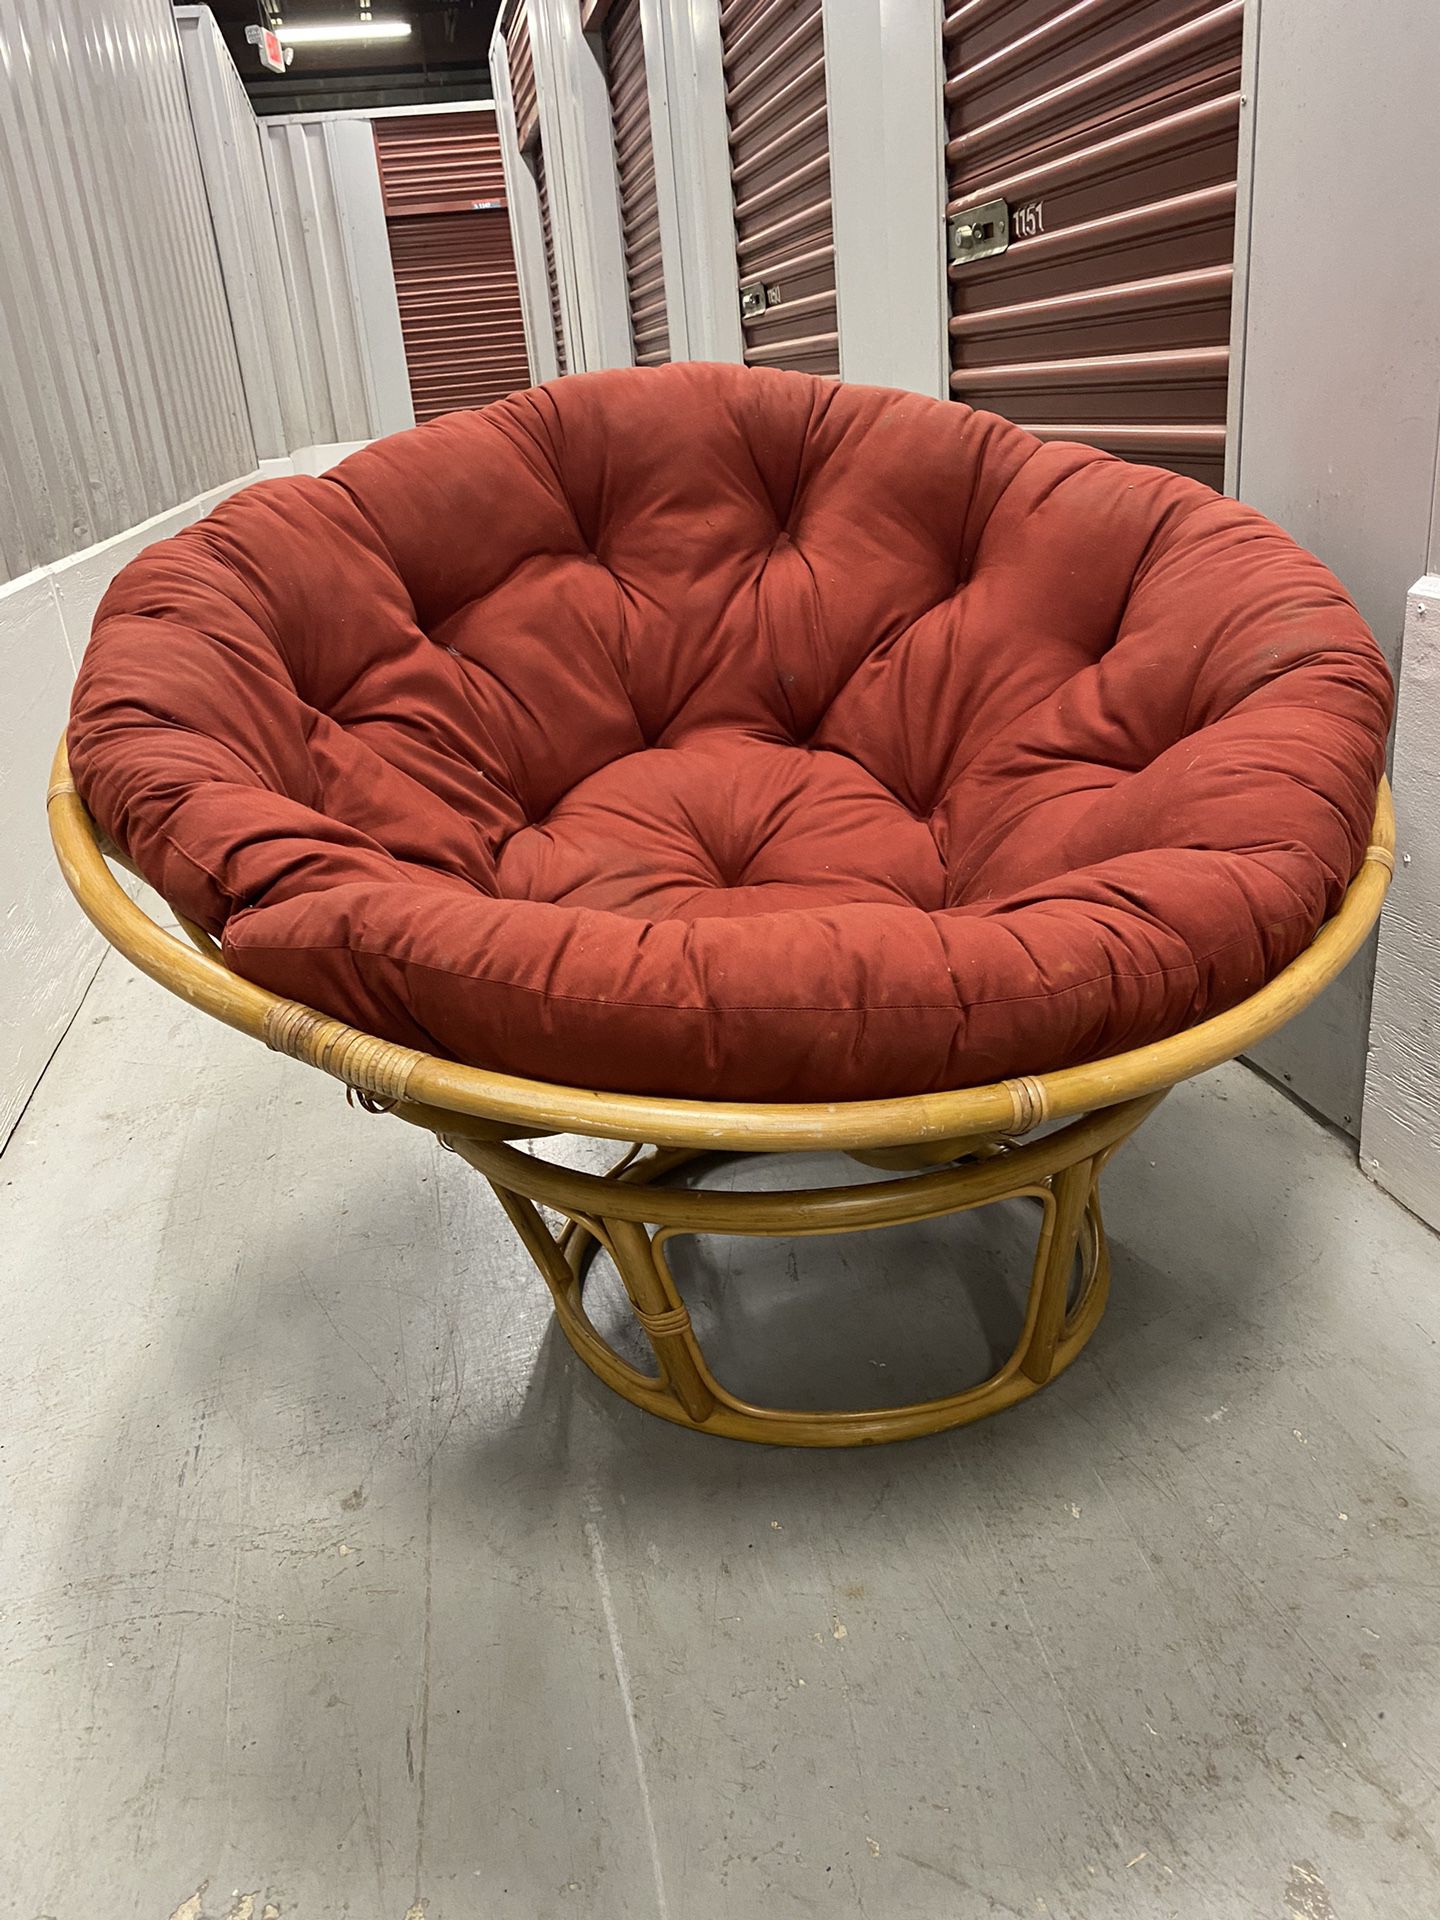 Papasan Chair Set Including Bamboo Frame Plus Cushion  Good pre-owned condition. There are some stains on the cushion but you could likely scrub them 